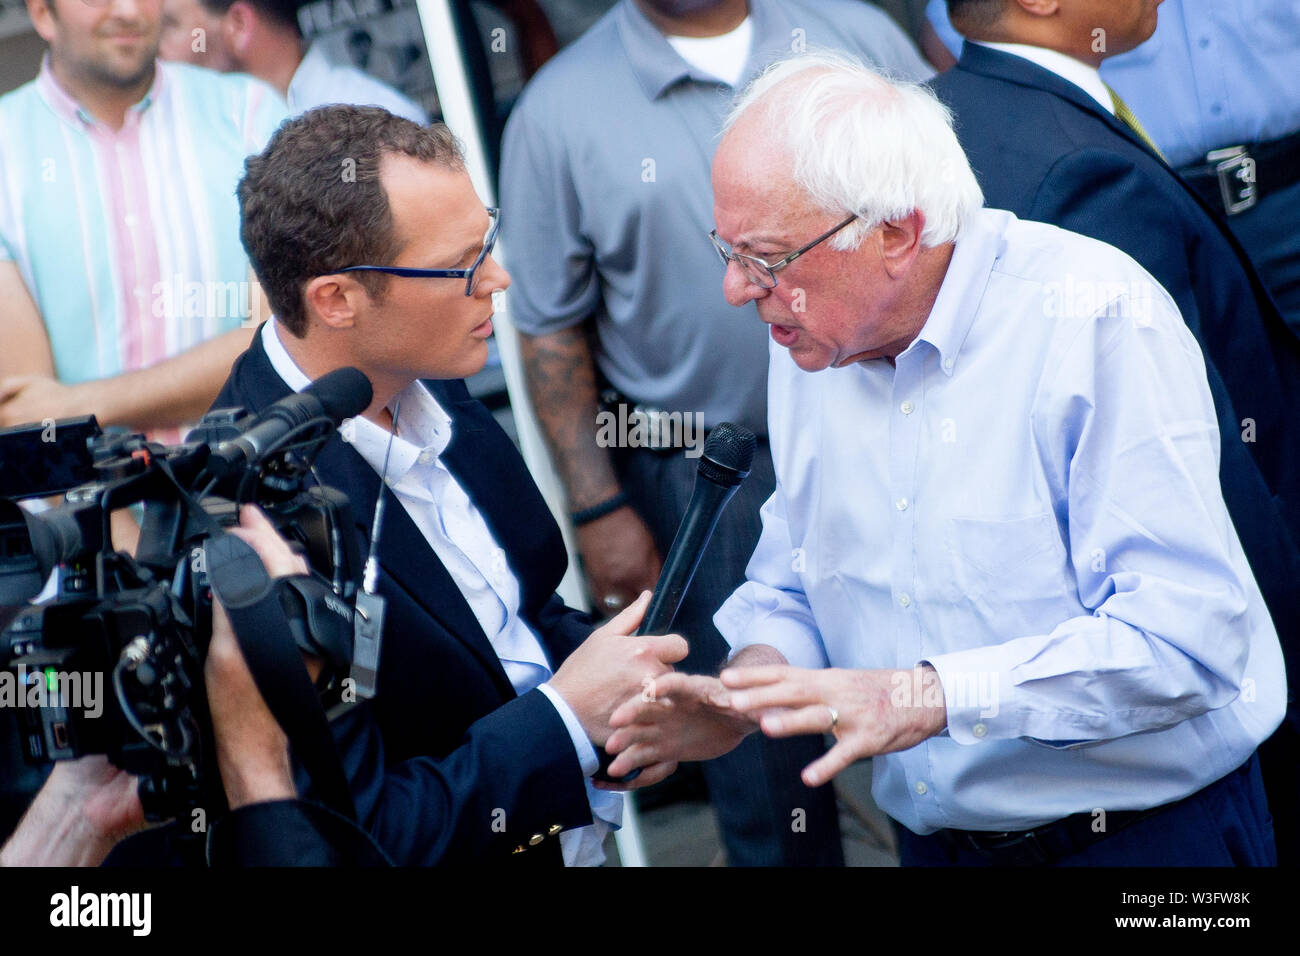 Philadelphia, Pennsylvania, USA. 15th July, 2019. Senator Bernie Sanders is interviewed following a protest against the closure of Hahnemann University Hospital in Philadelphia, PA, July 15, 2019. Hahnemann, a busy urban healthcare center, is facing imminent closure after being acquired by a hedge fund that is looking to raze the building and turn the land into rental or retail properties. 15th July, 2019. Credit: Michael Candelori/ZUMA Wire/Alamy Live News Credit: ZUMA Press, Inc./Alamy Live News Stock Photo